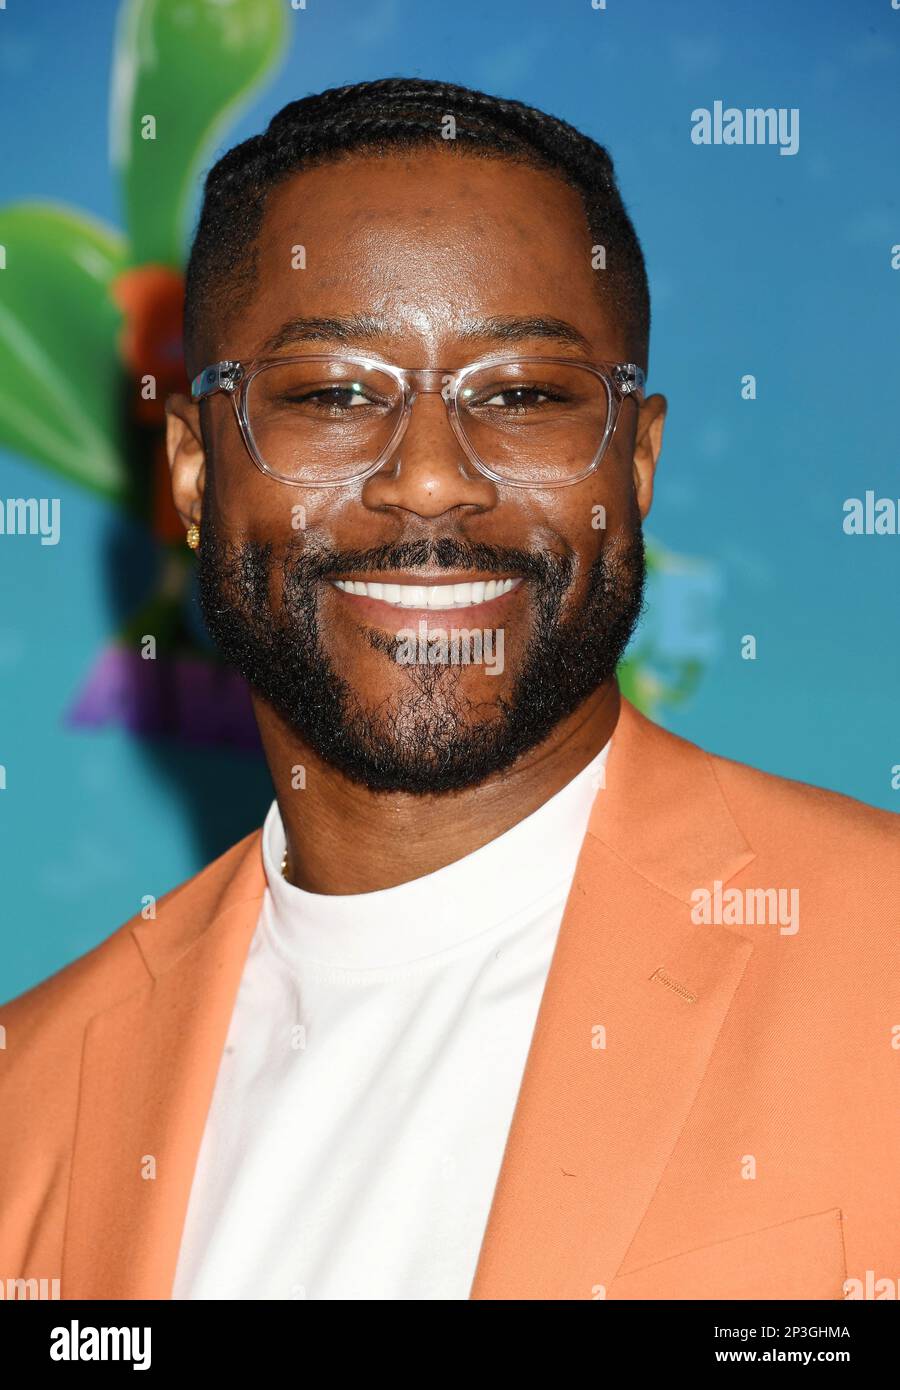 Mia Burleson, Nate Burleson at arrivals for Nickelodeon Kids Choice Awards,  Microsoft Theater, Los A